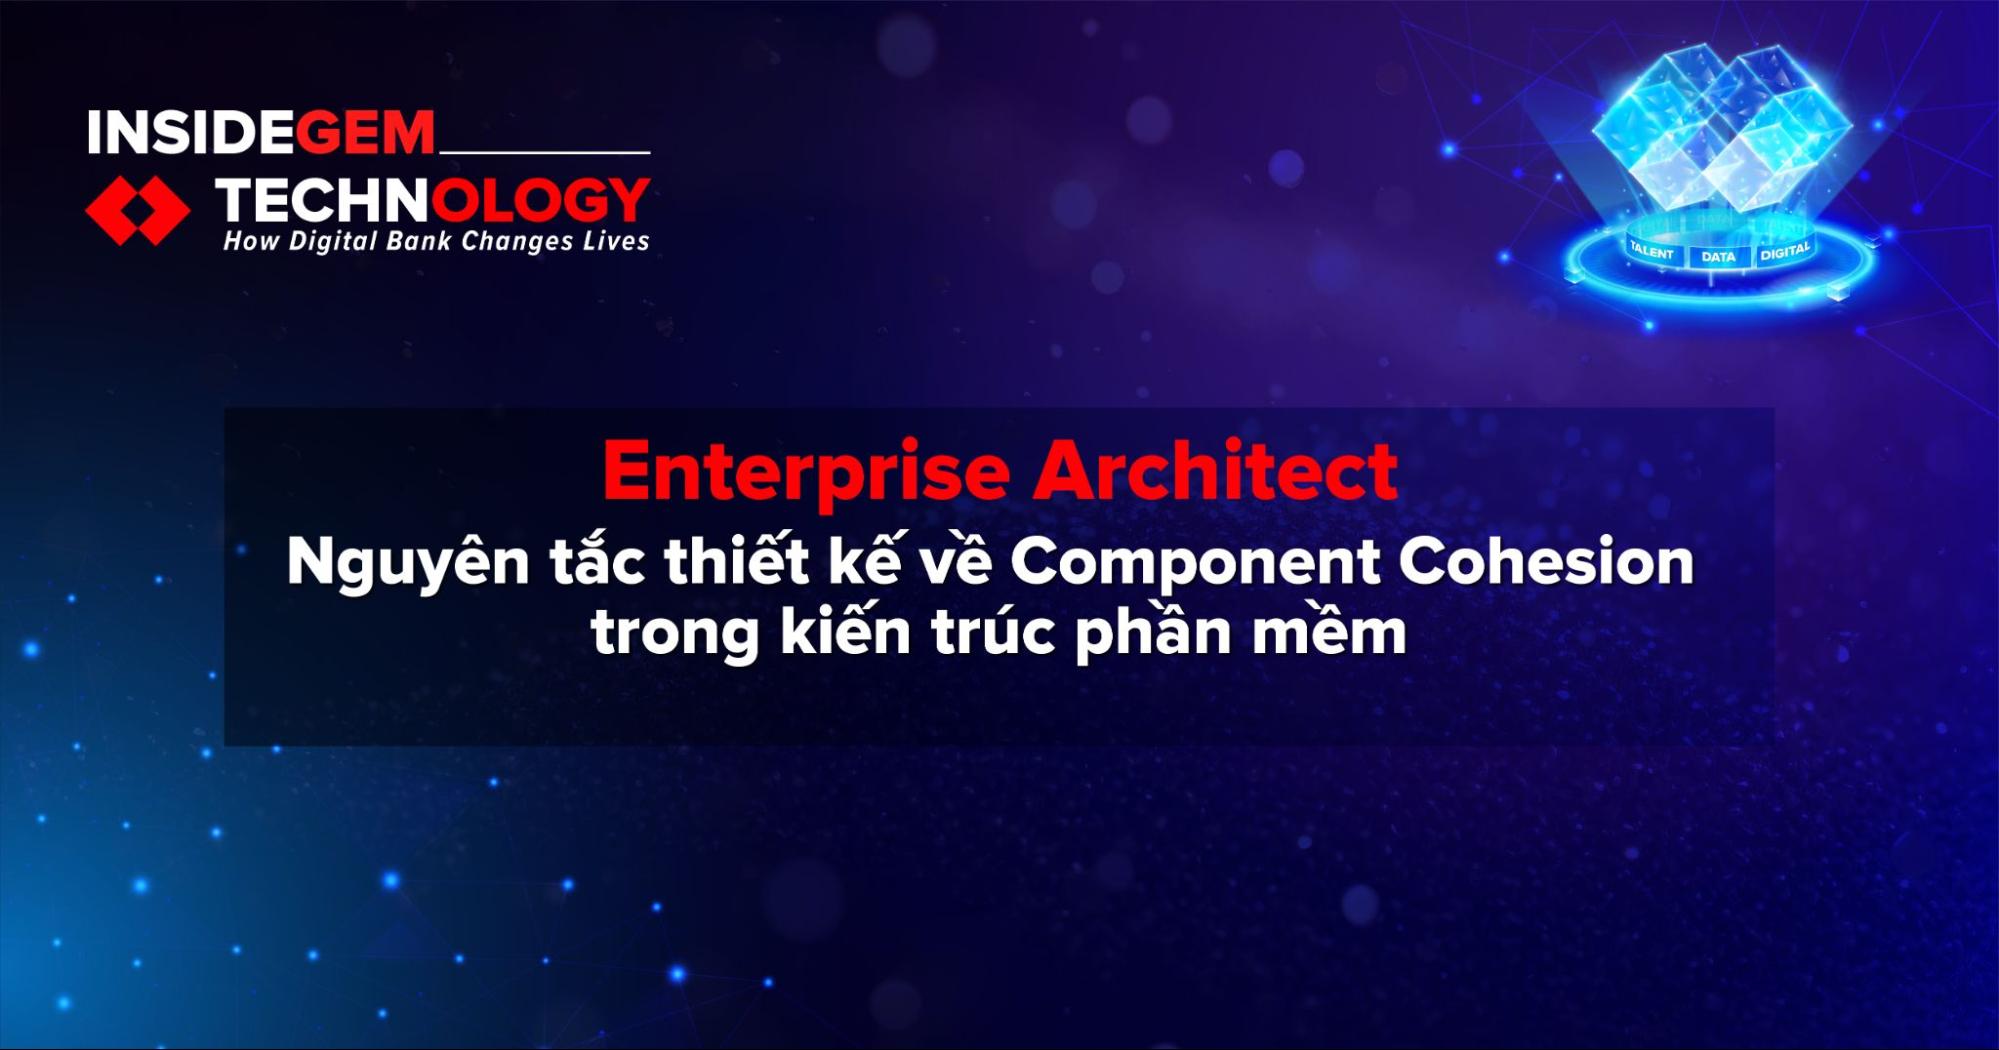 Nguyên tắc thiết kế về Component Cohesion trong kiến trúc phần mềm (Principles of Component Cohesion in Software Architectures)